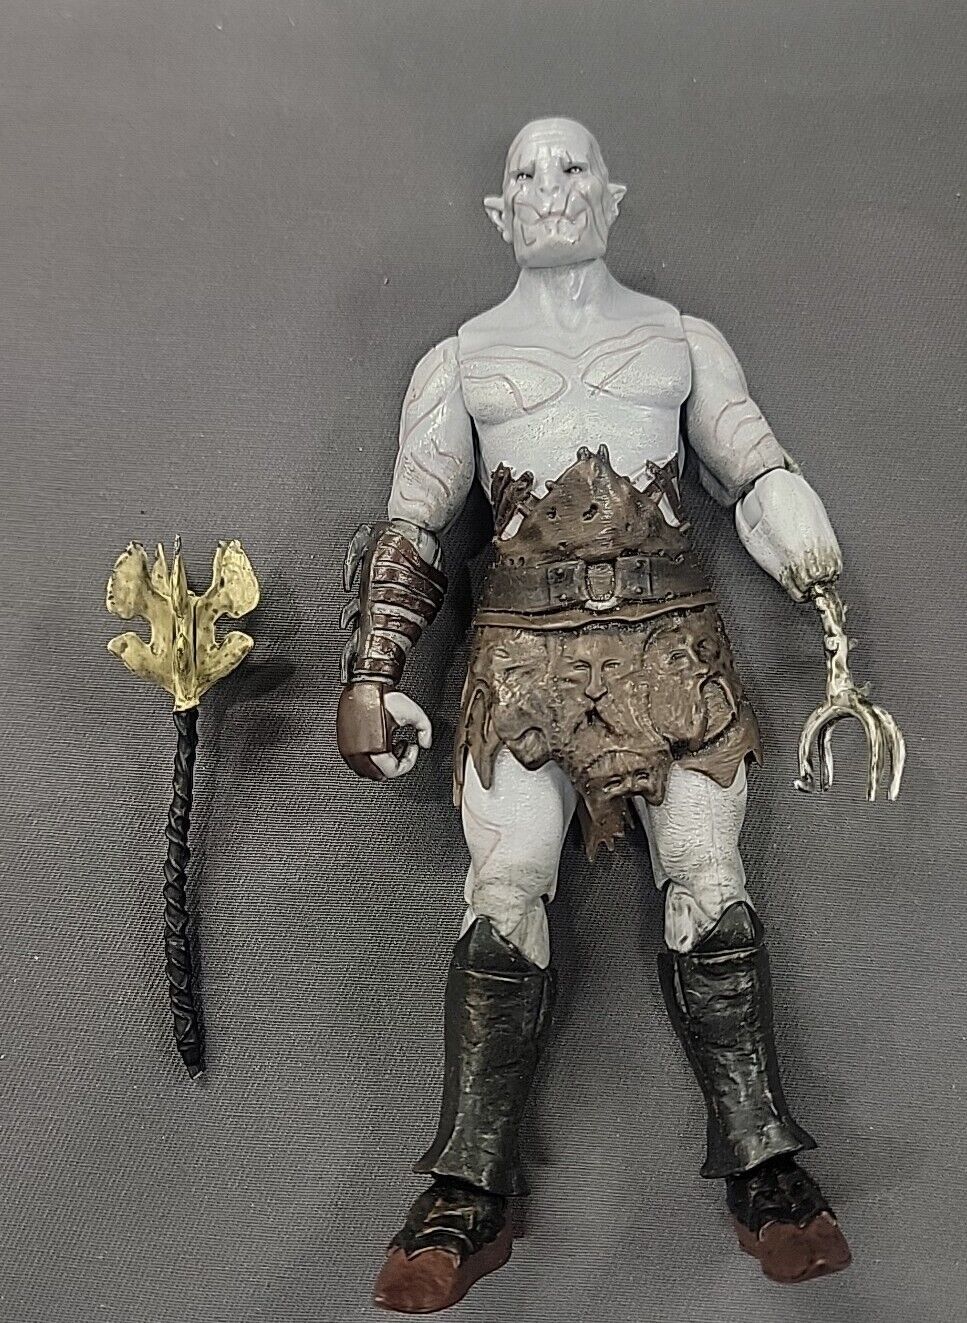 The Hobbit Desolation of Smaug Azog Orc Action Figure LOTR 2012